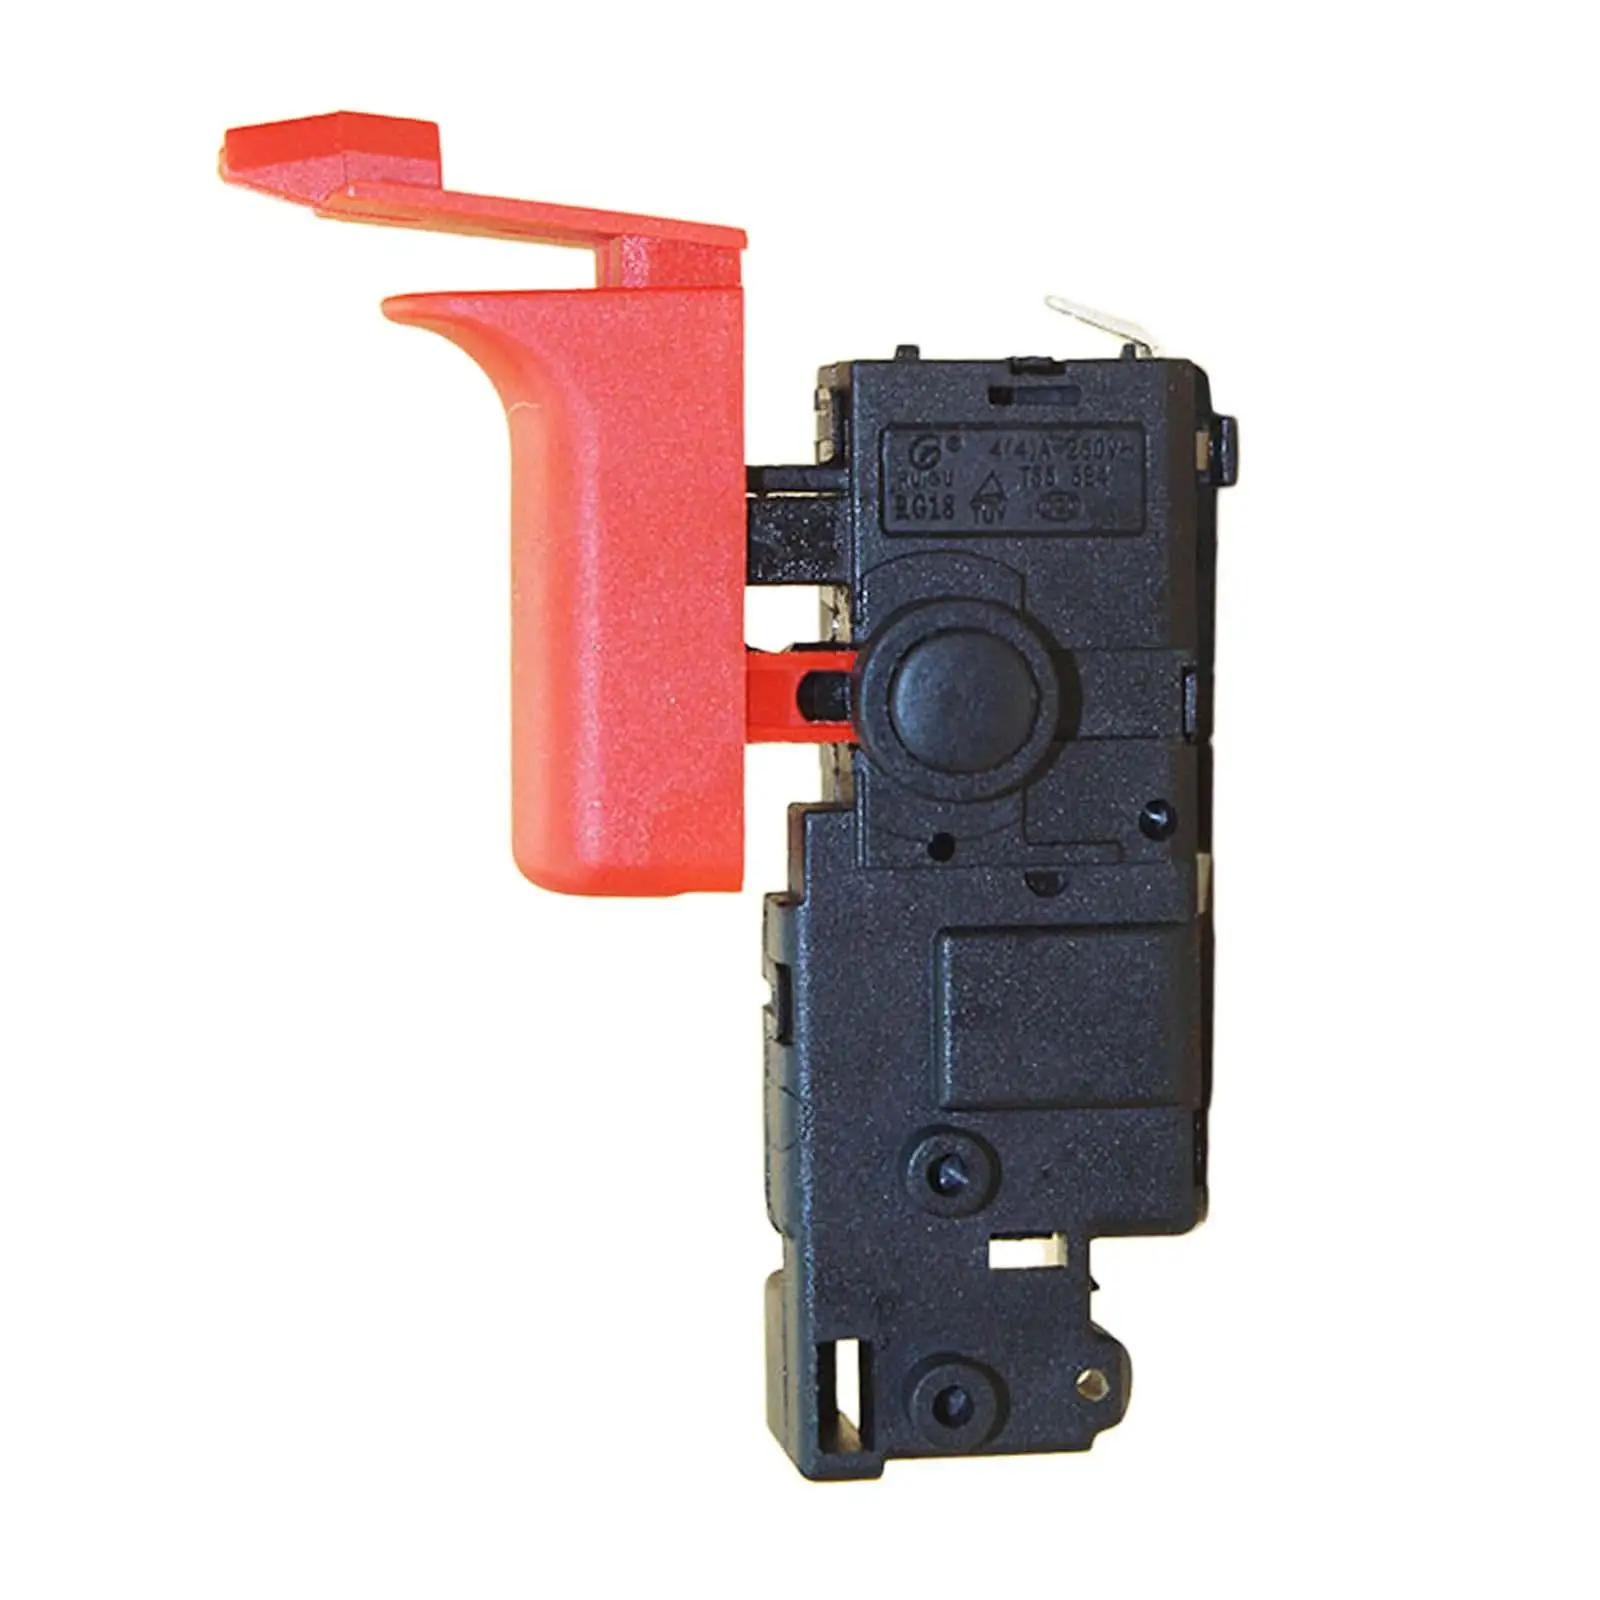 Rotory Hammer Switch Power Tools Parts Replacement for GBH 2-28 D/22/26